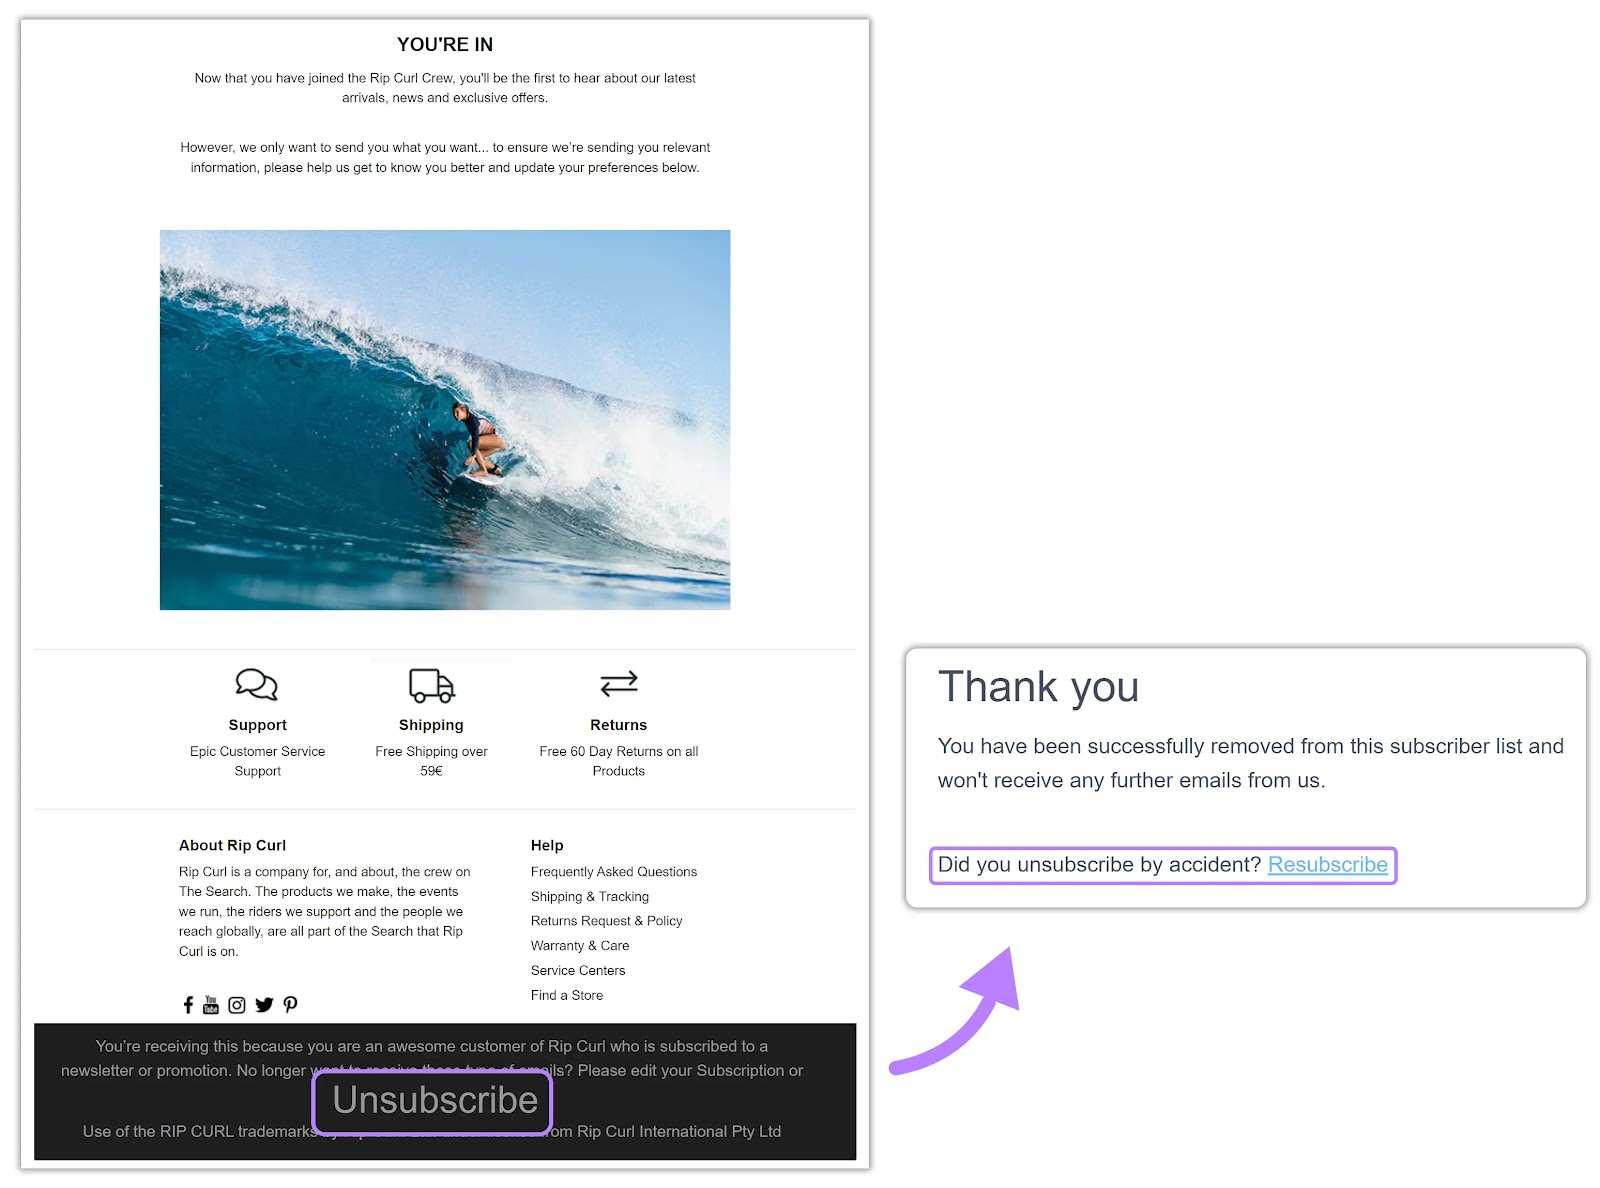 Rip Curl's email with an "Unsubscribe" button highlighted at the bottom